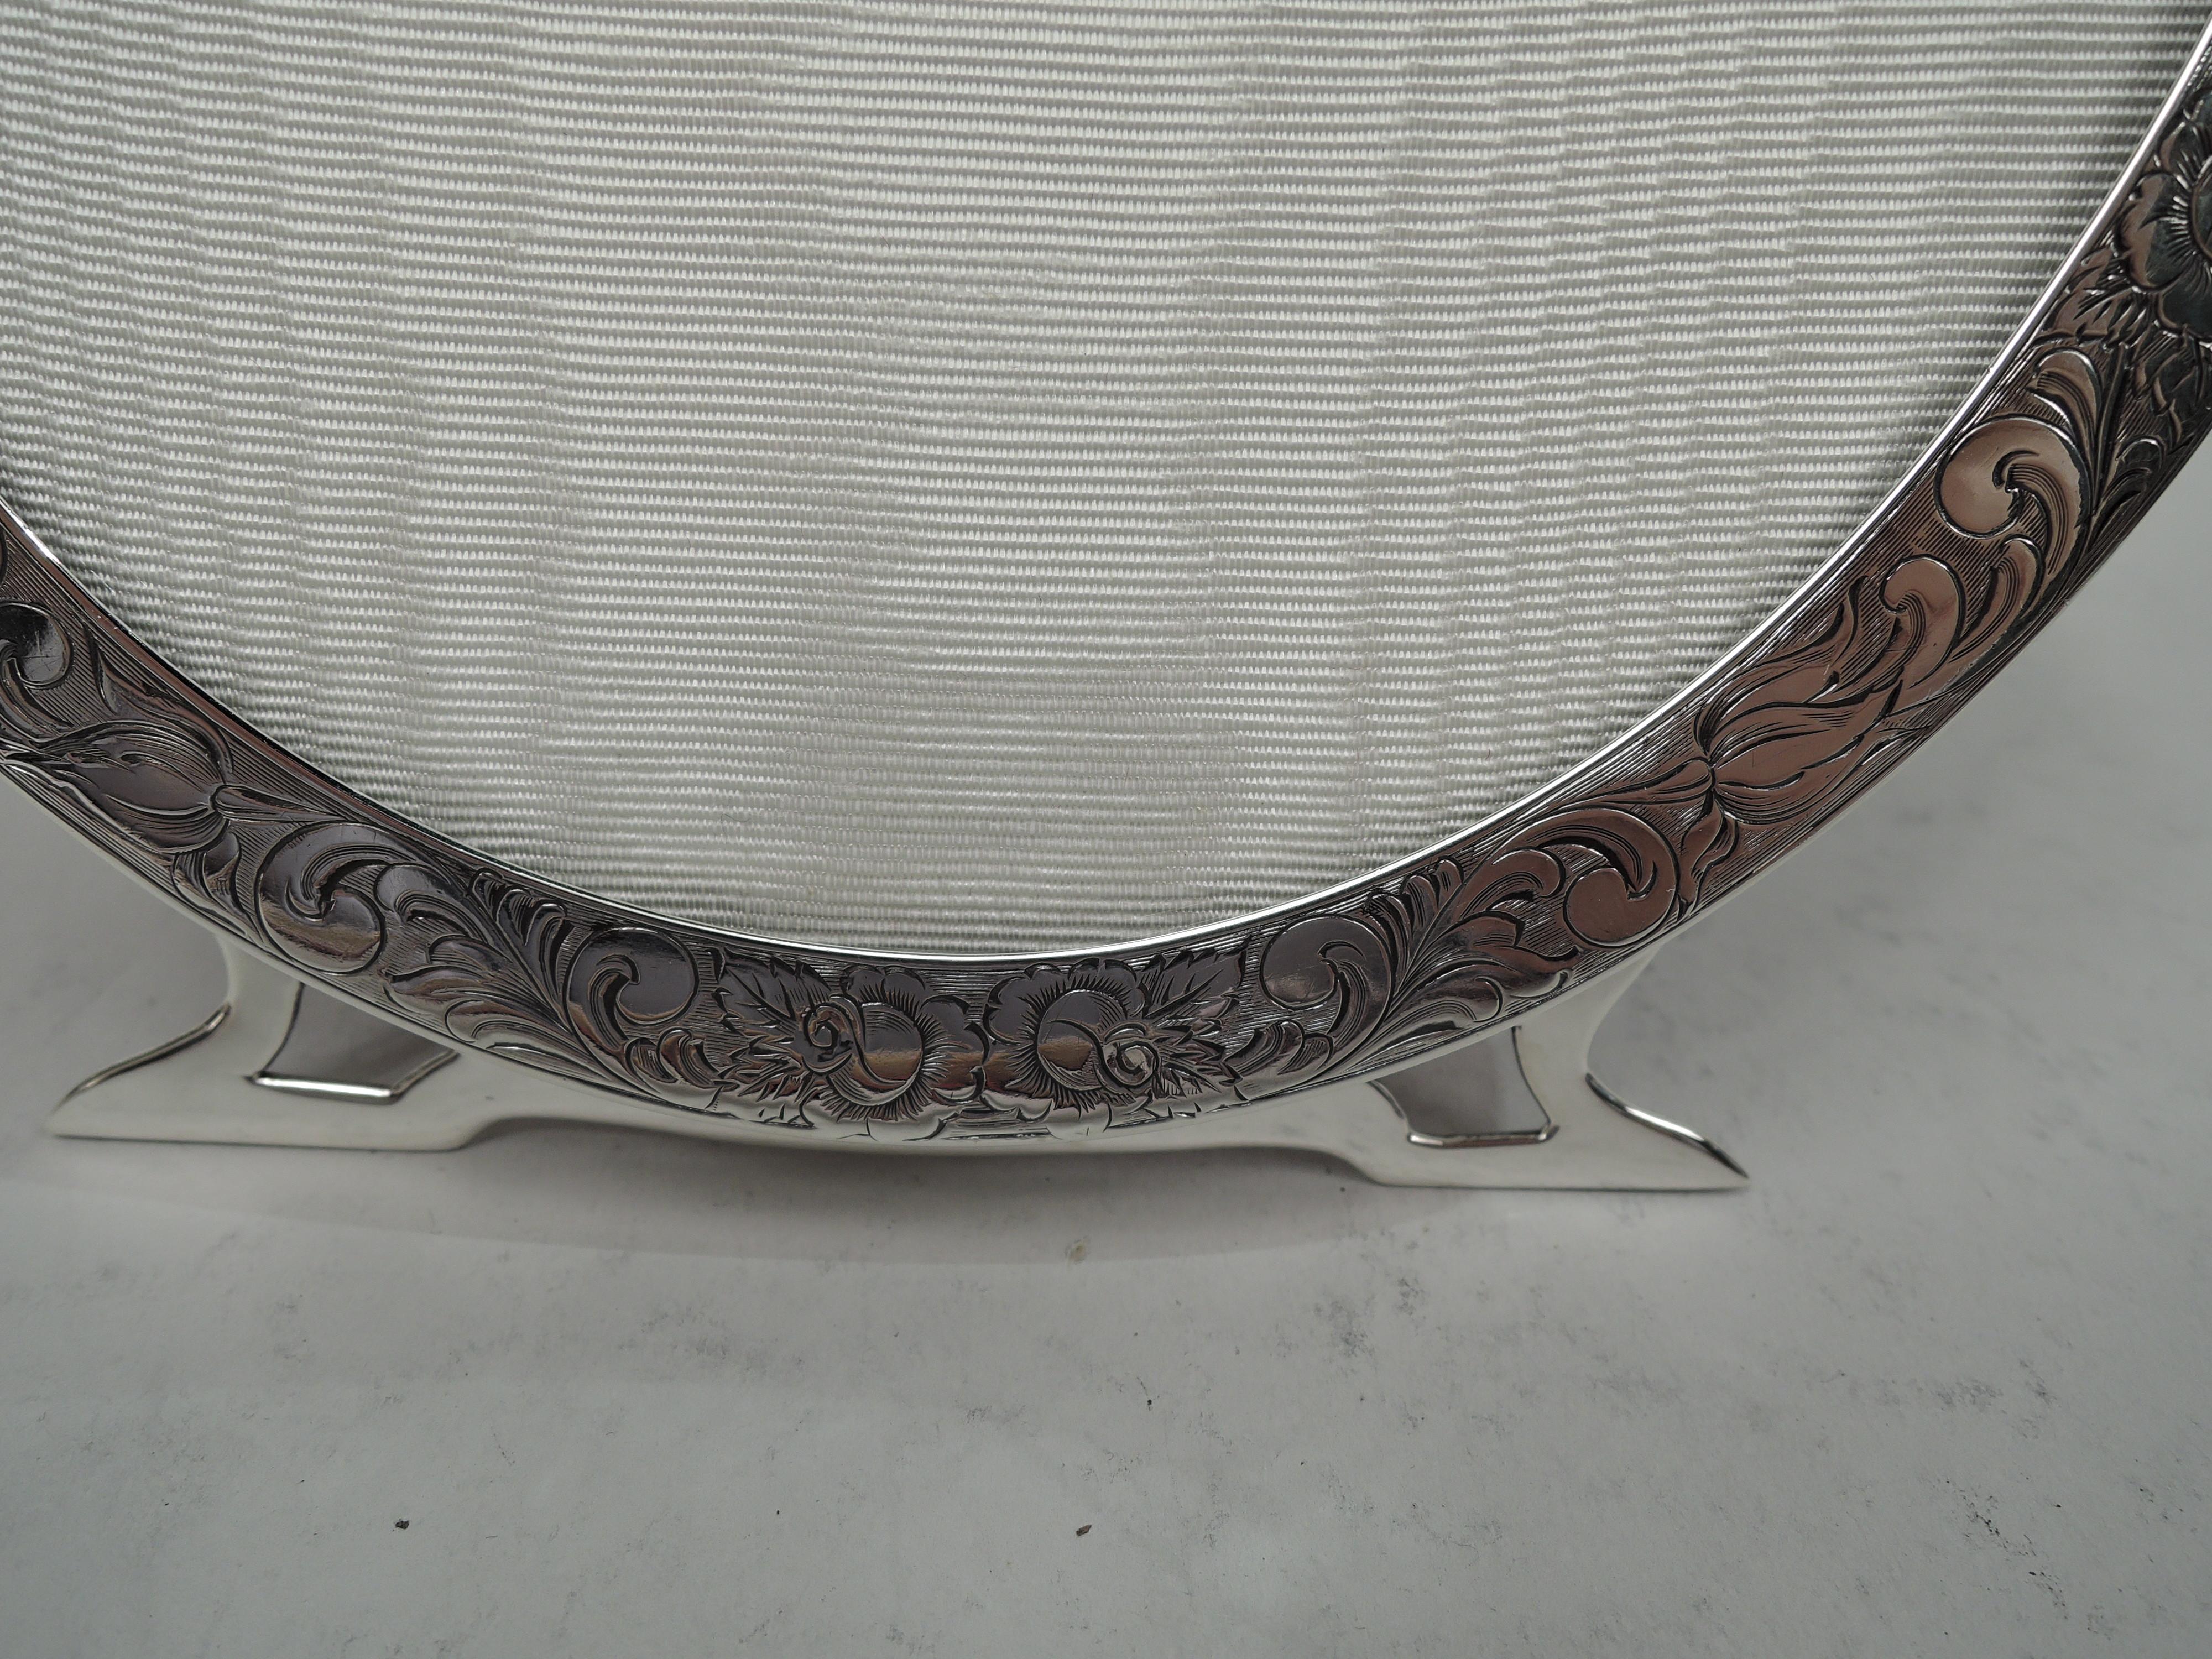 Lovely Antique American Edwardian Art Nouveau Oval Picture Frame In Good Condition For Sale In New York, NY